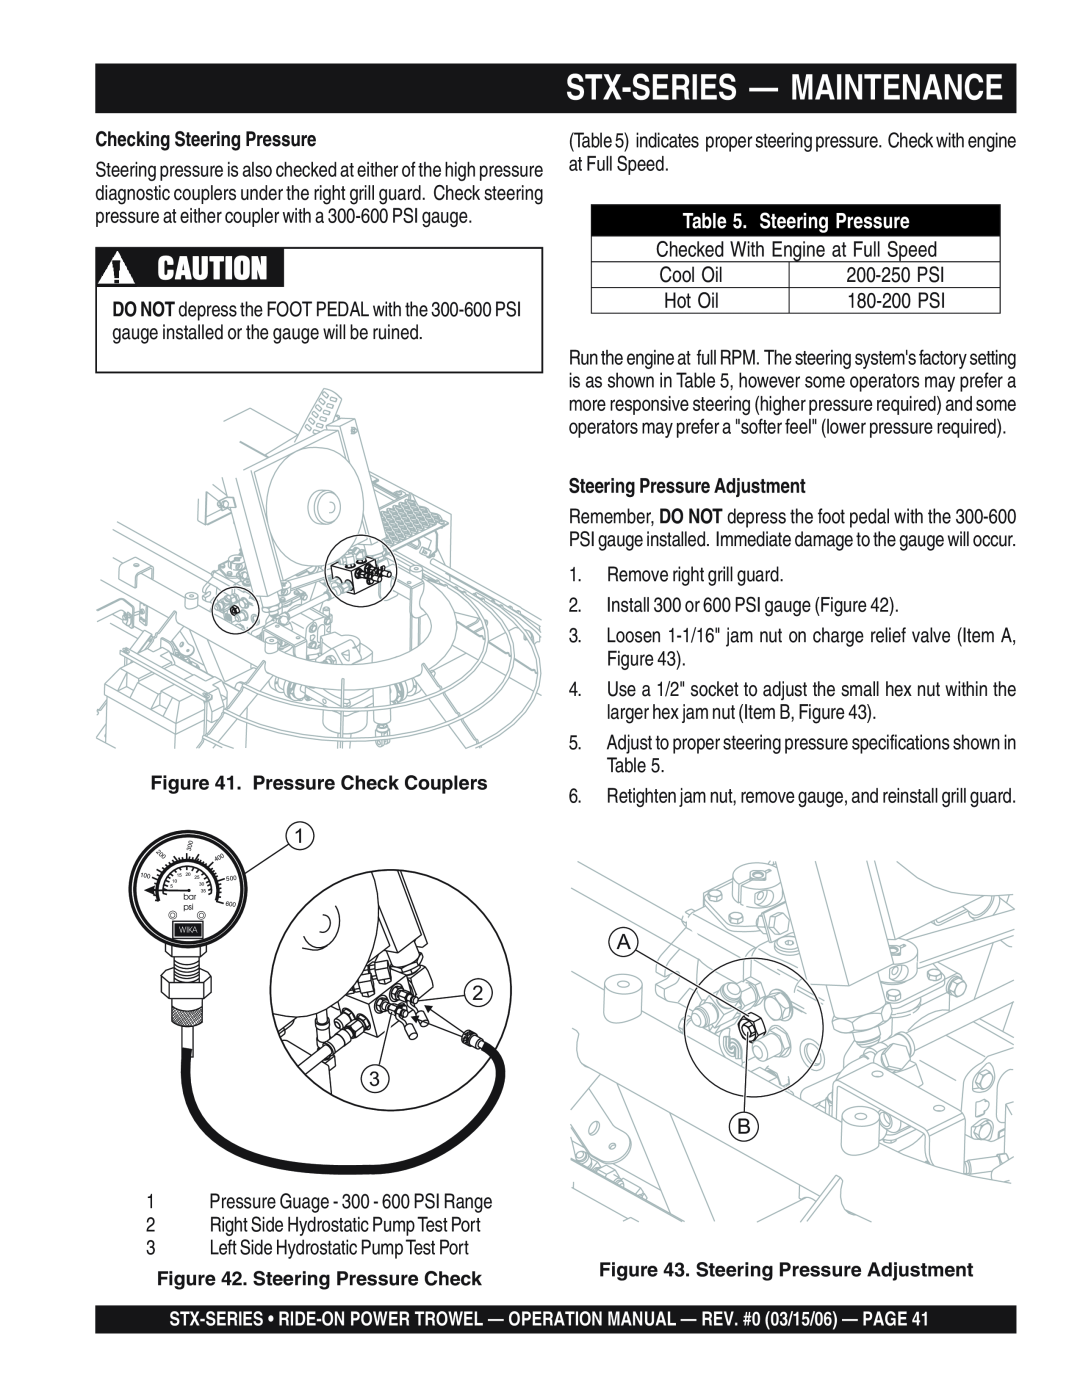 Multiquip STX55Y6 operation manual Stx-Series- Maintenance, Checking Steering Pressure, Pressure Check Couplers 